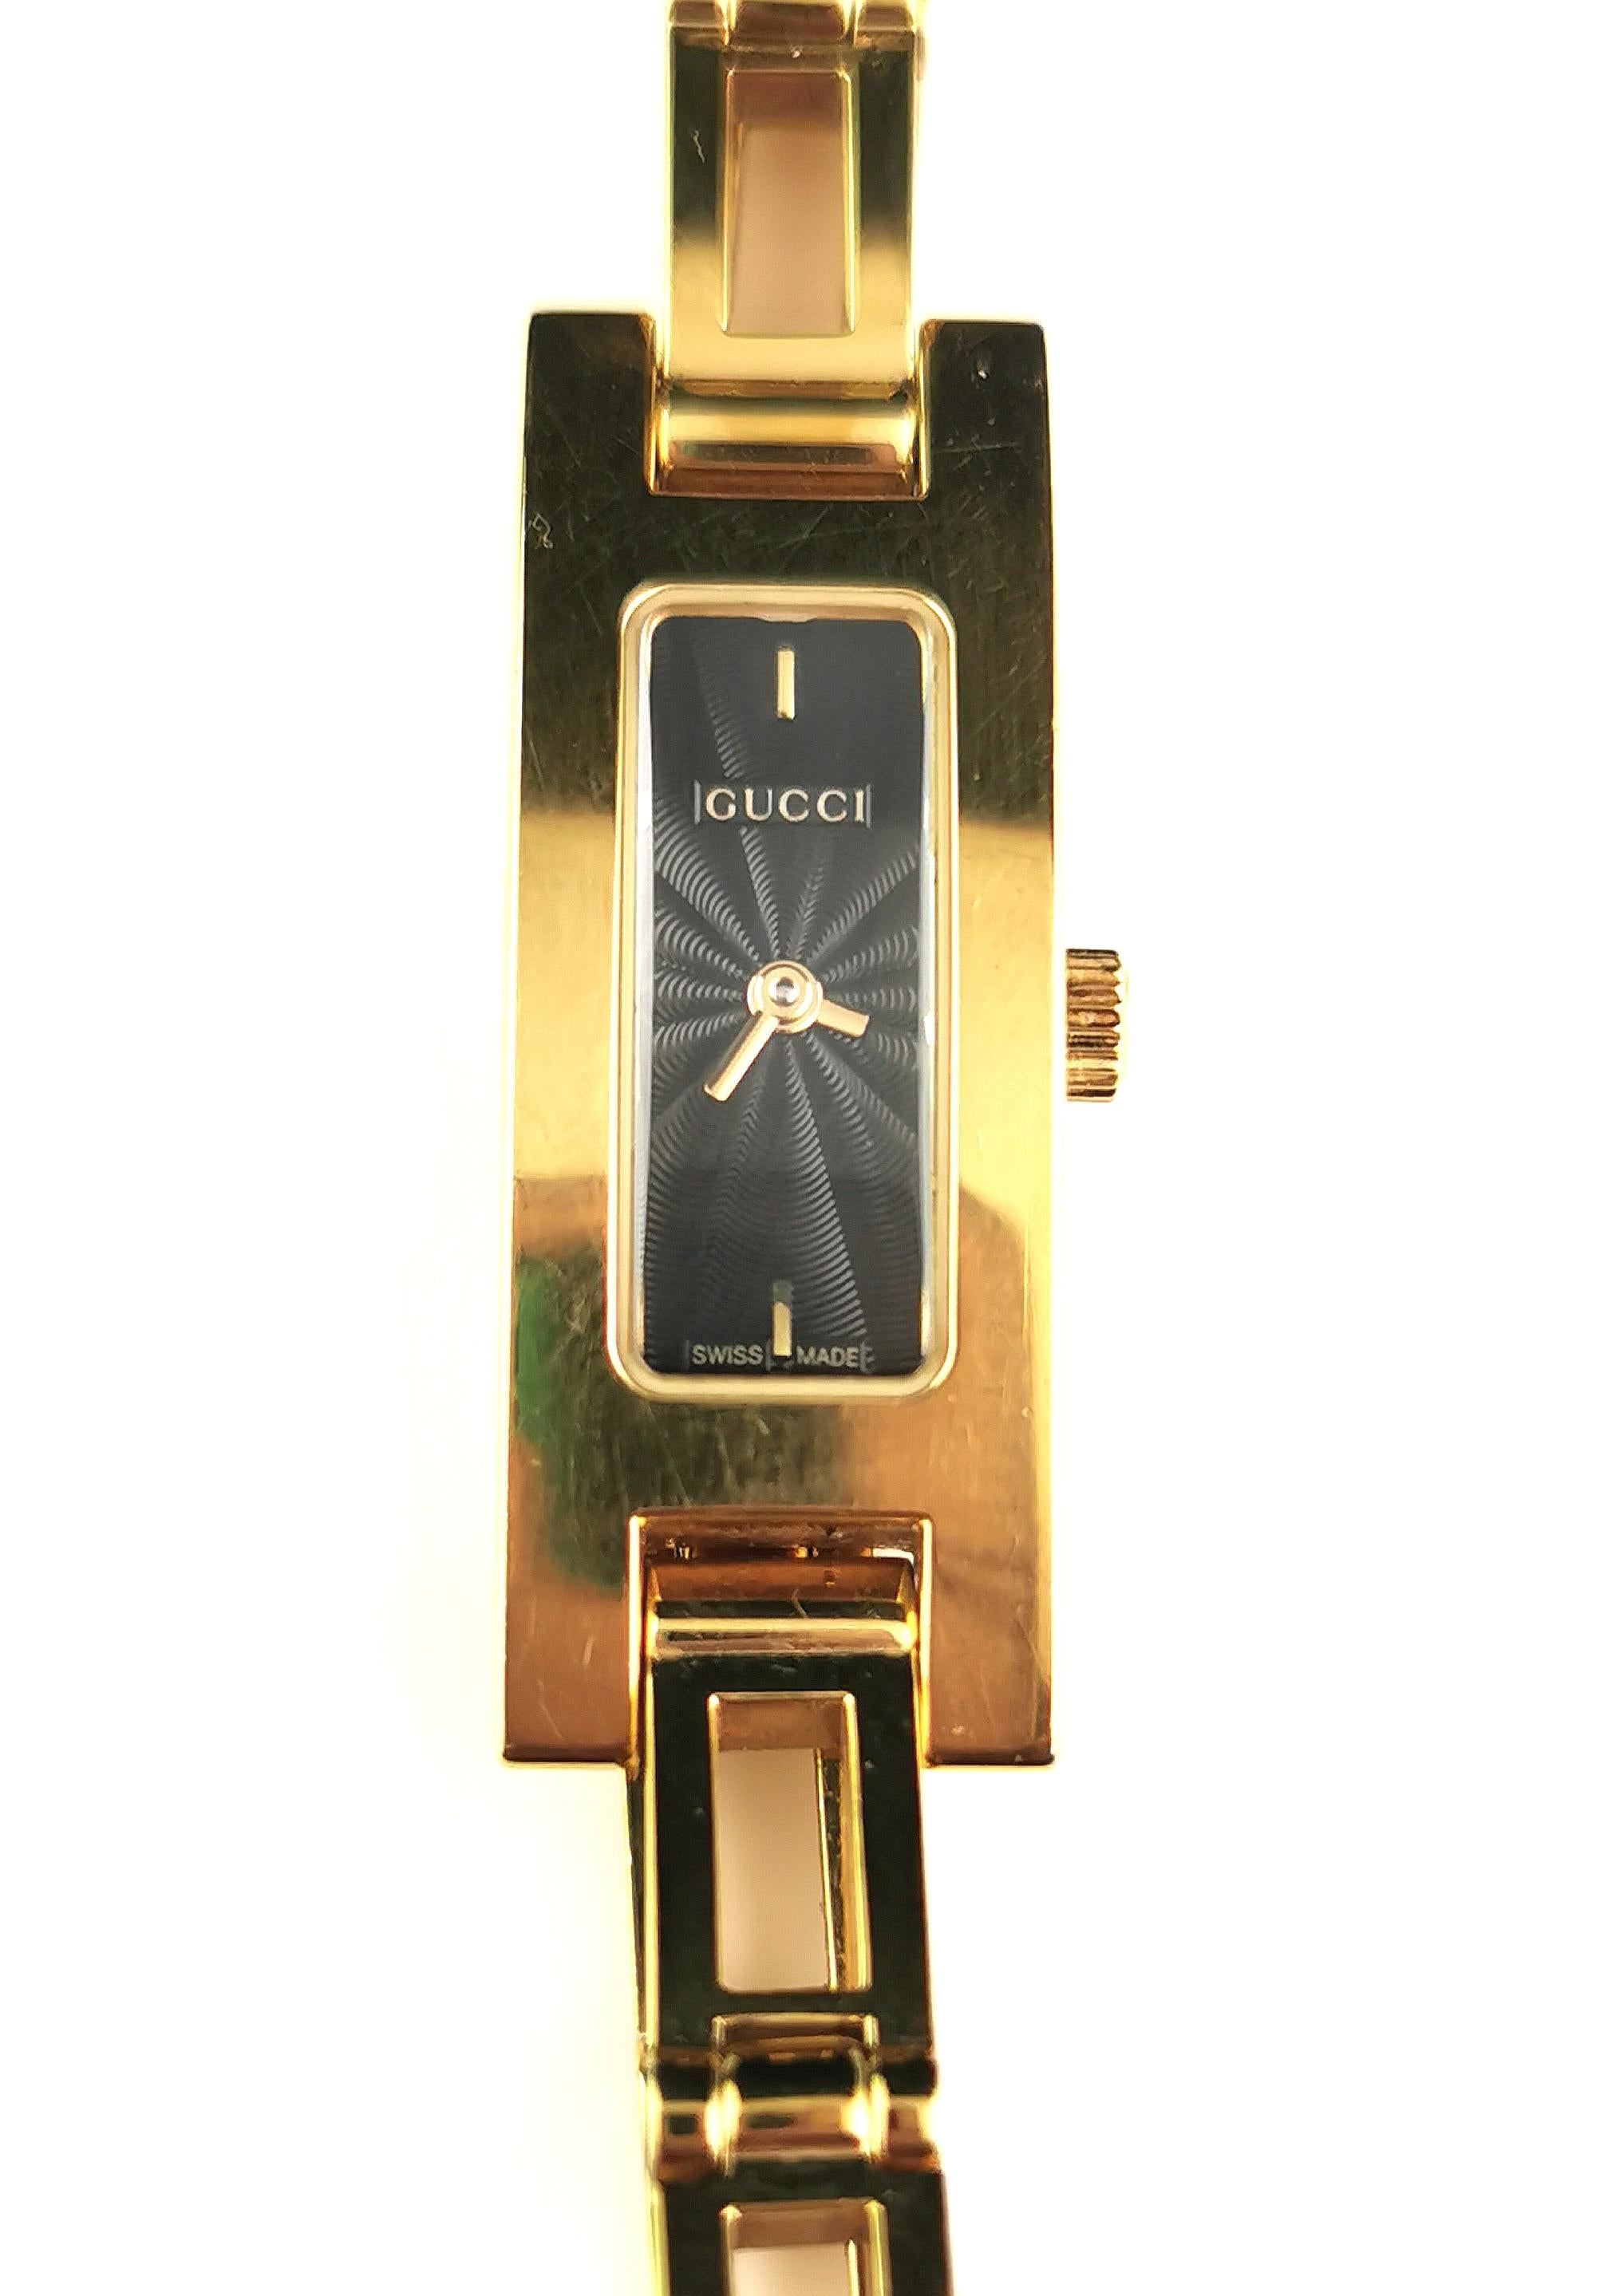 A stylish ladies Gucci 3900l gold plated watch.

This is a bracelet strap watch with an elegant rectangular shape face and a rich black dial.

Most often come in white dial colour so this is a particularly nice one.

It is gold plated stainless